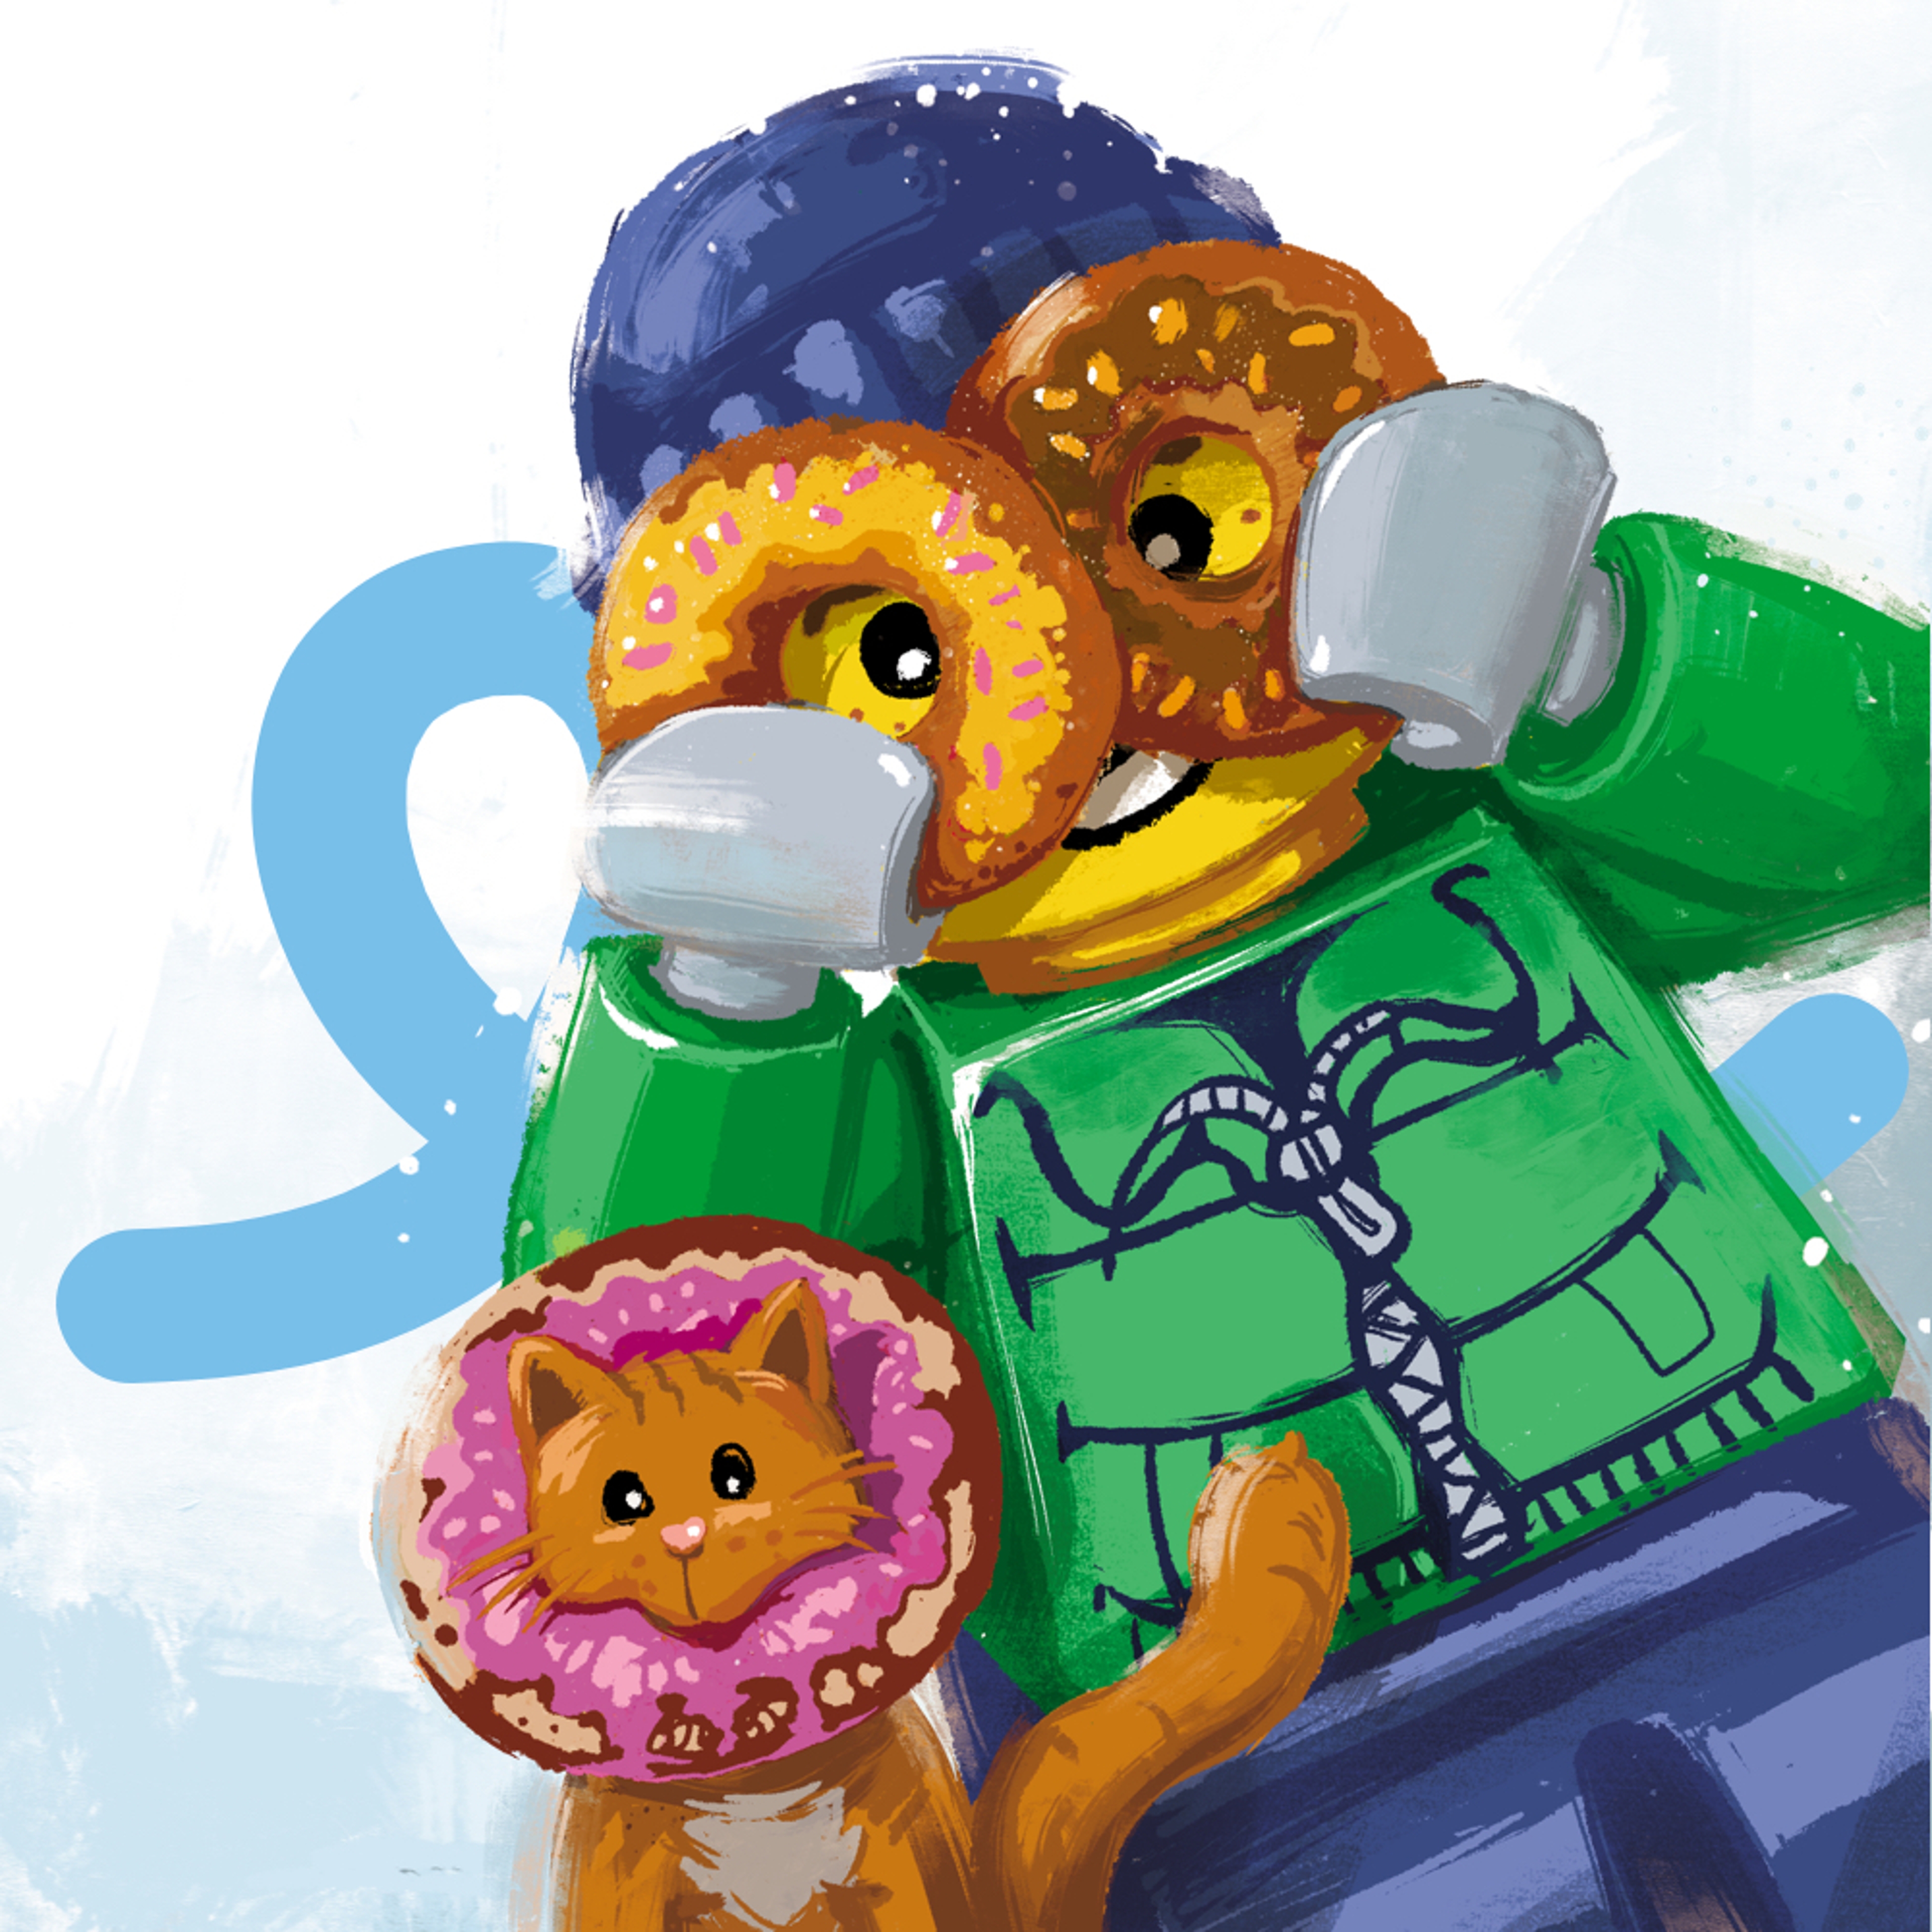 Minifigure looking through donuts with a cat